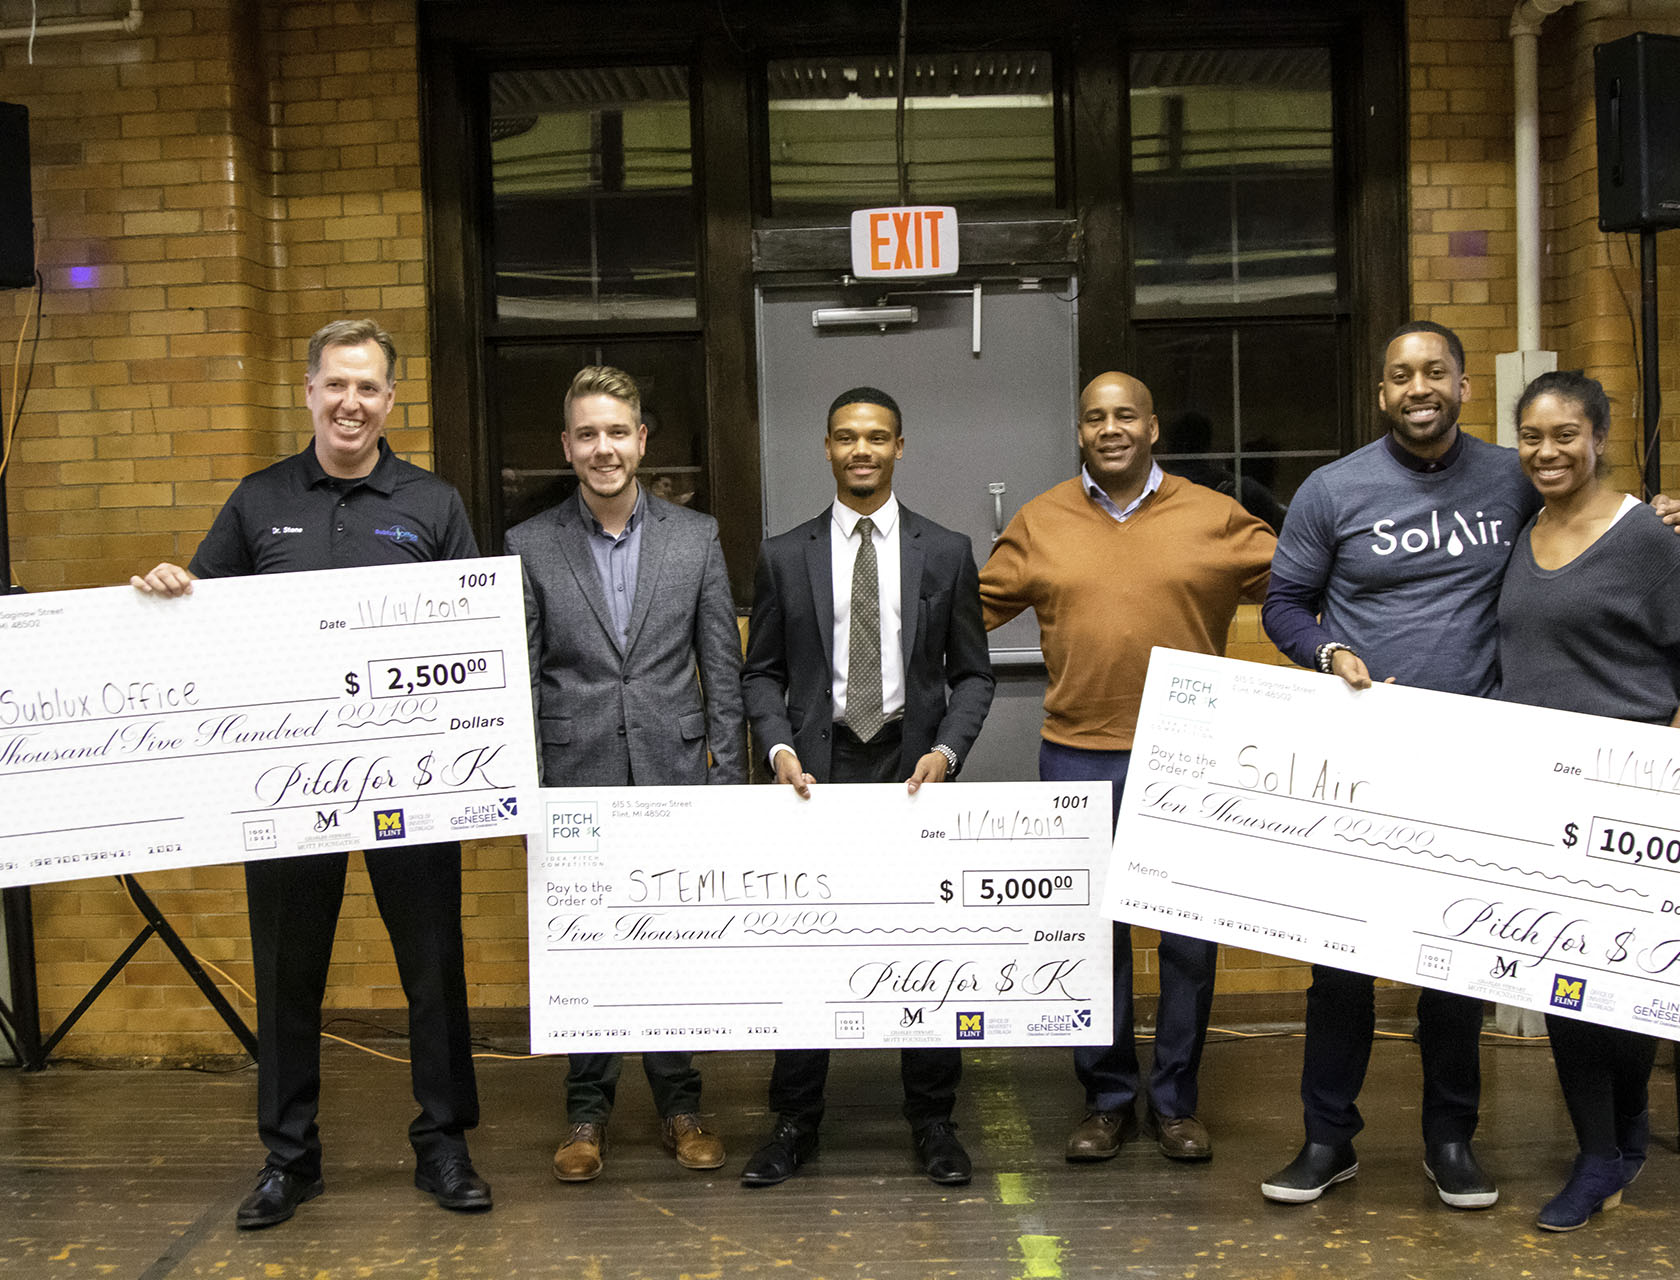 Chris Stallworth poses with winners of a Pitch For $K competition in 2019 that took place at Berston Filed House in Flint, Michigan.